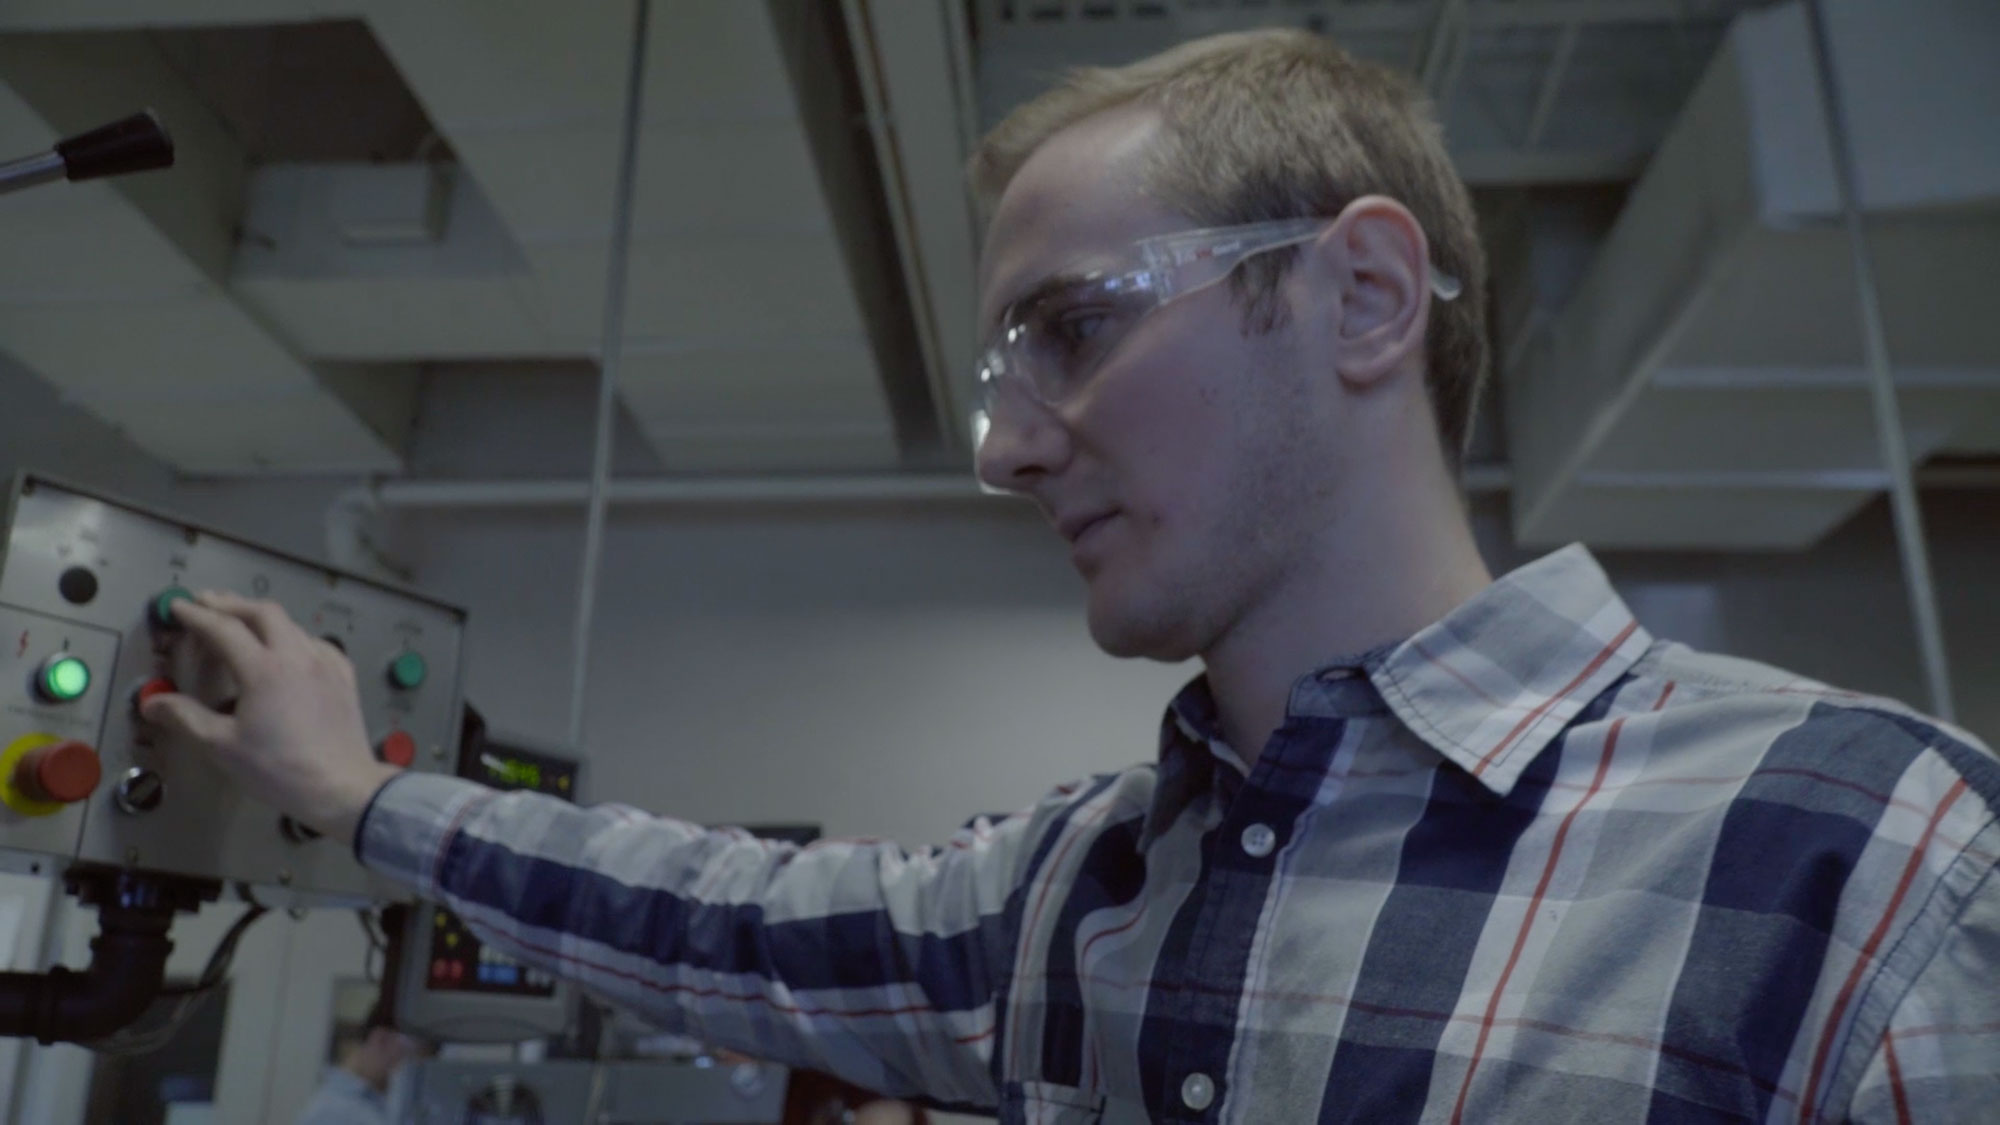 Watch Evan Beery, former Engineering Technologies student, share his story